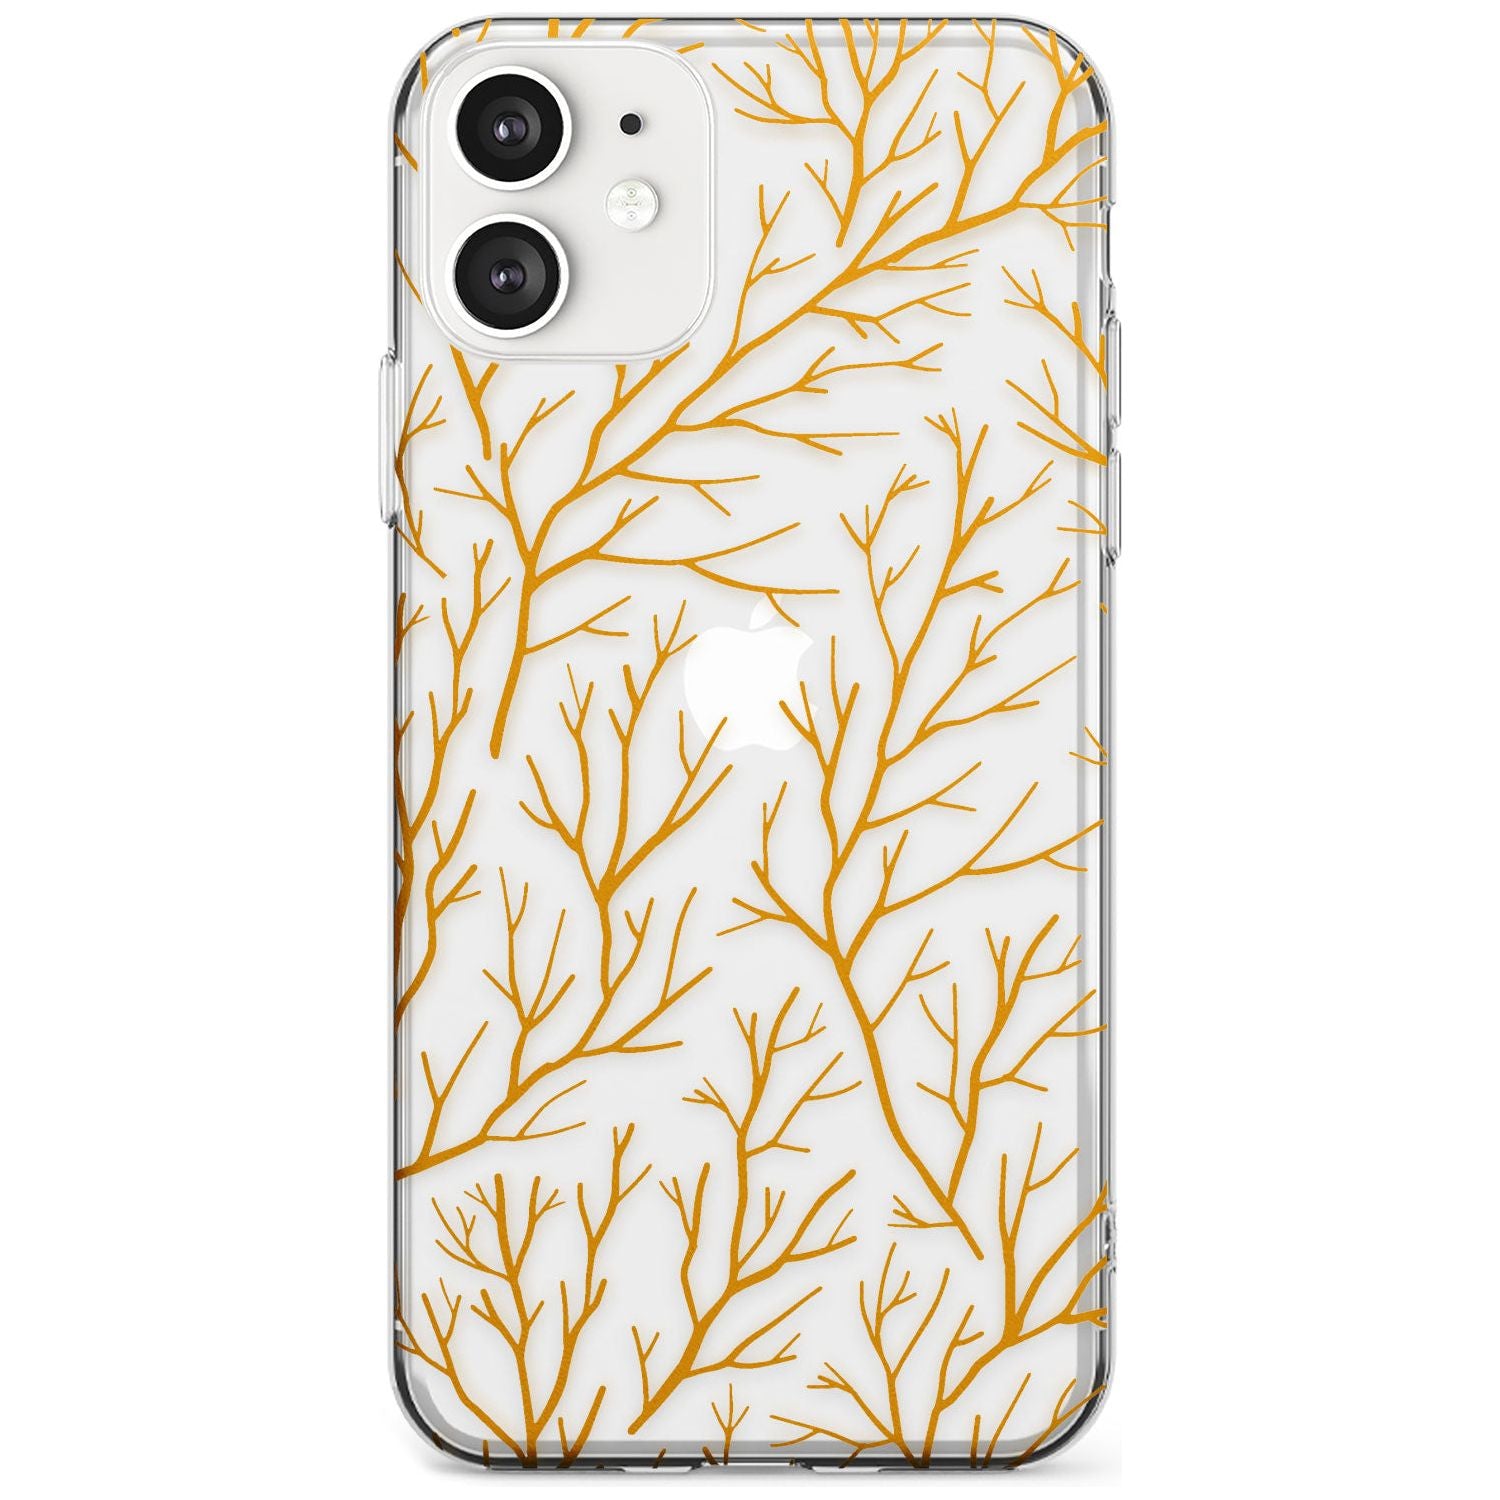 Personalised Bramble Branches Pattern Slim TPU Phone Case for iPhone 11